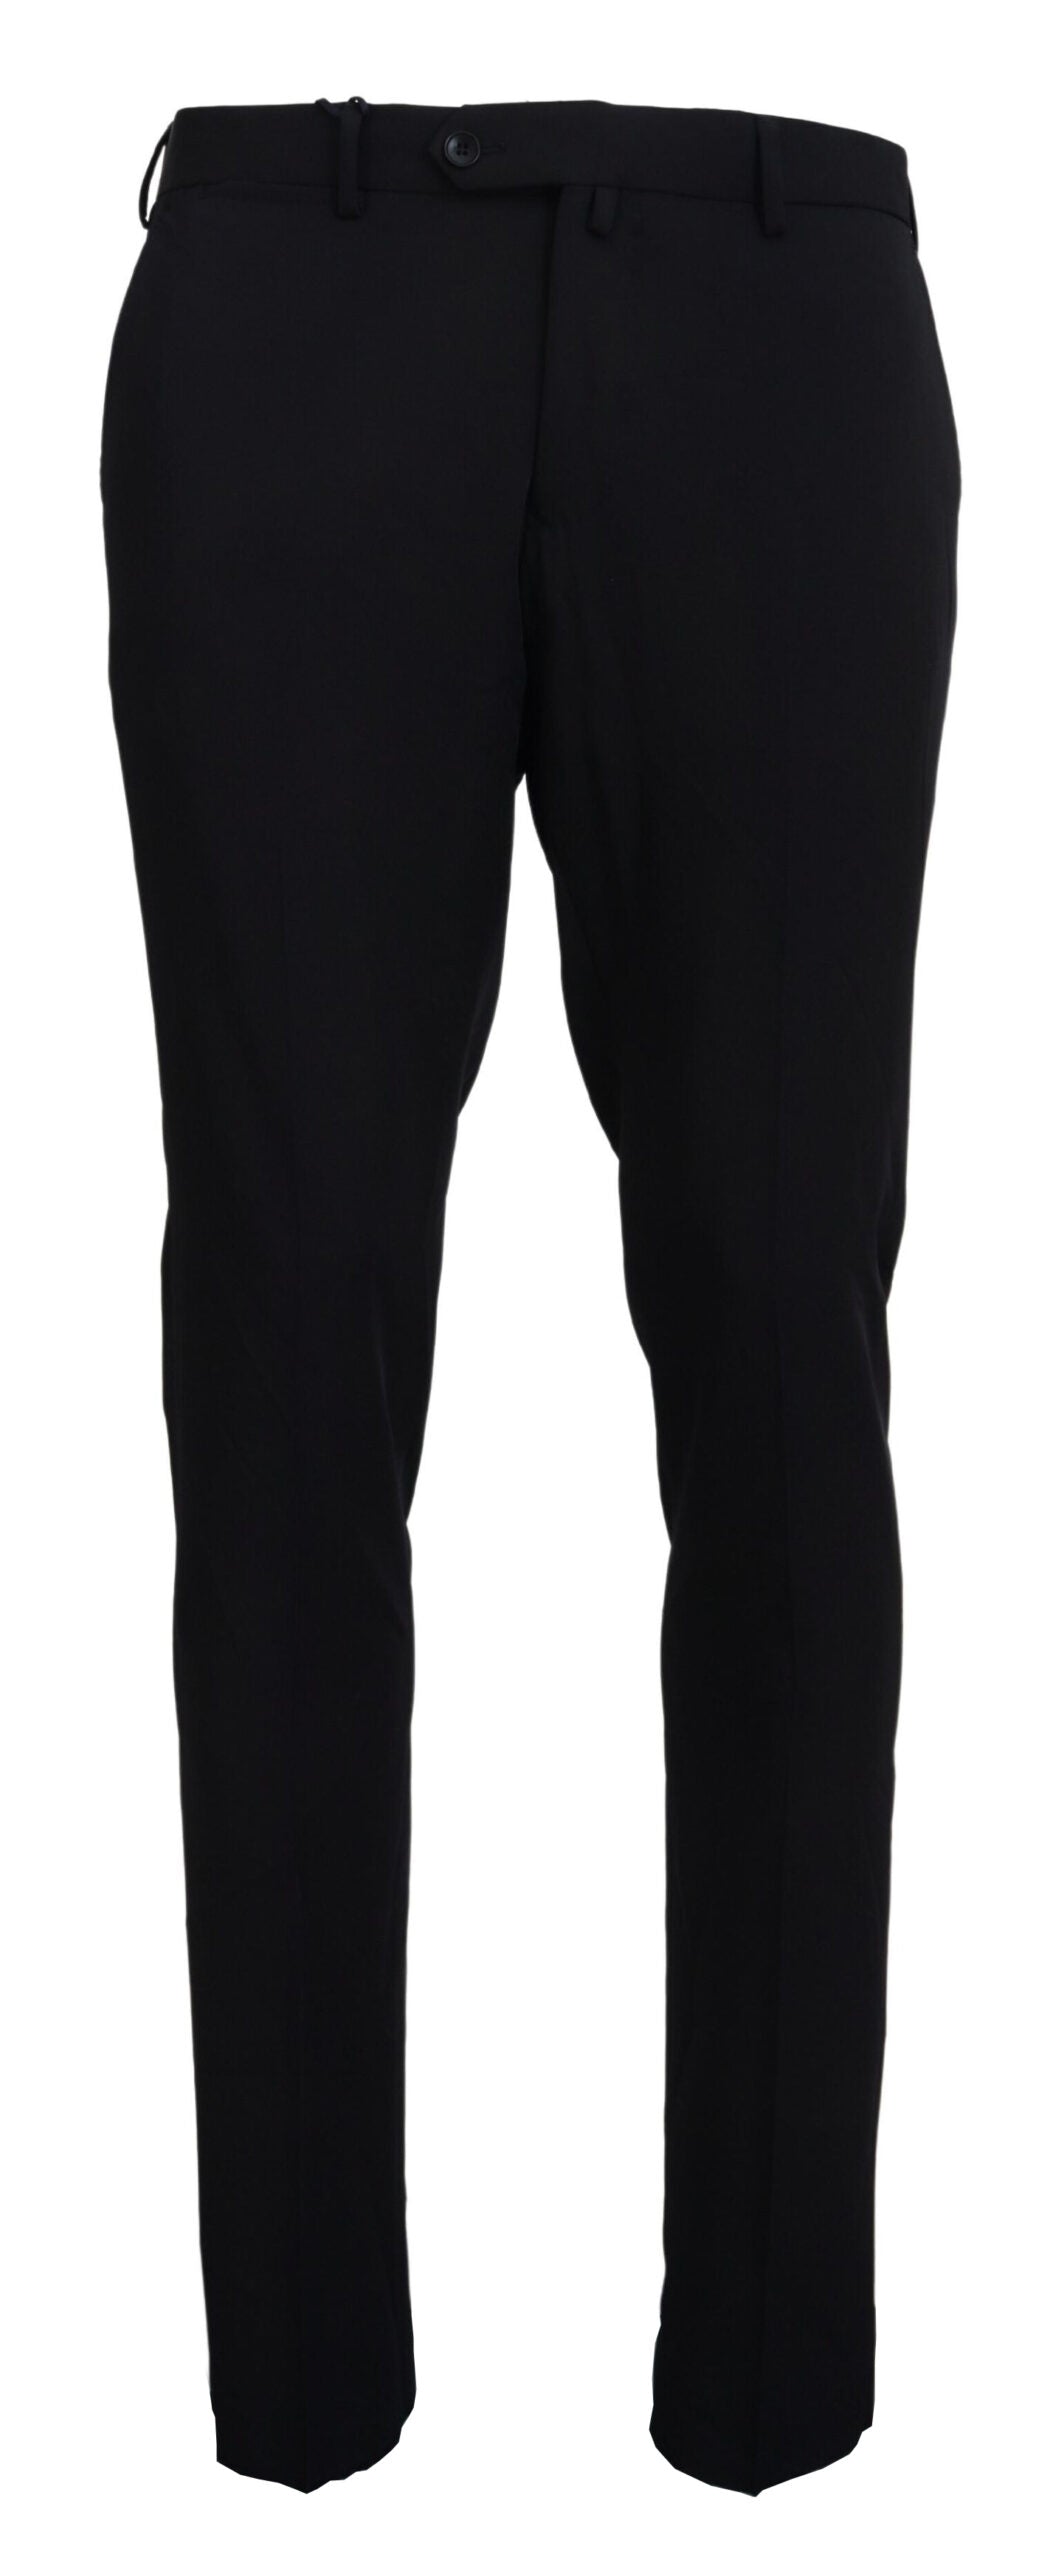 Doico Tagliente Black Polyester Tapered Dress Pants